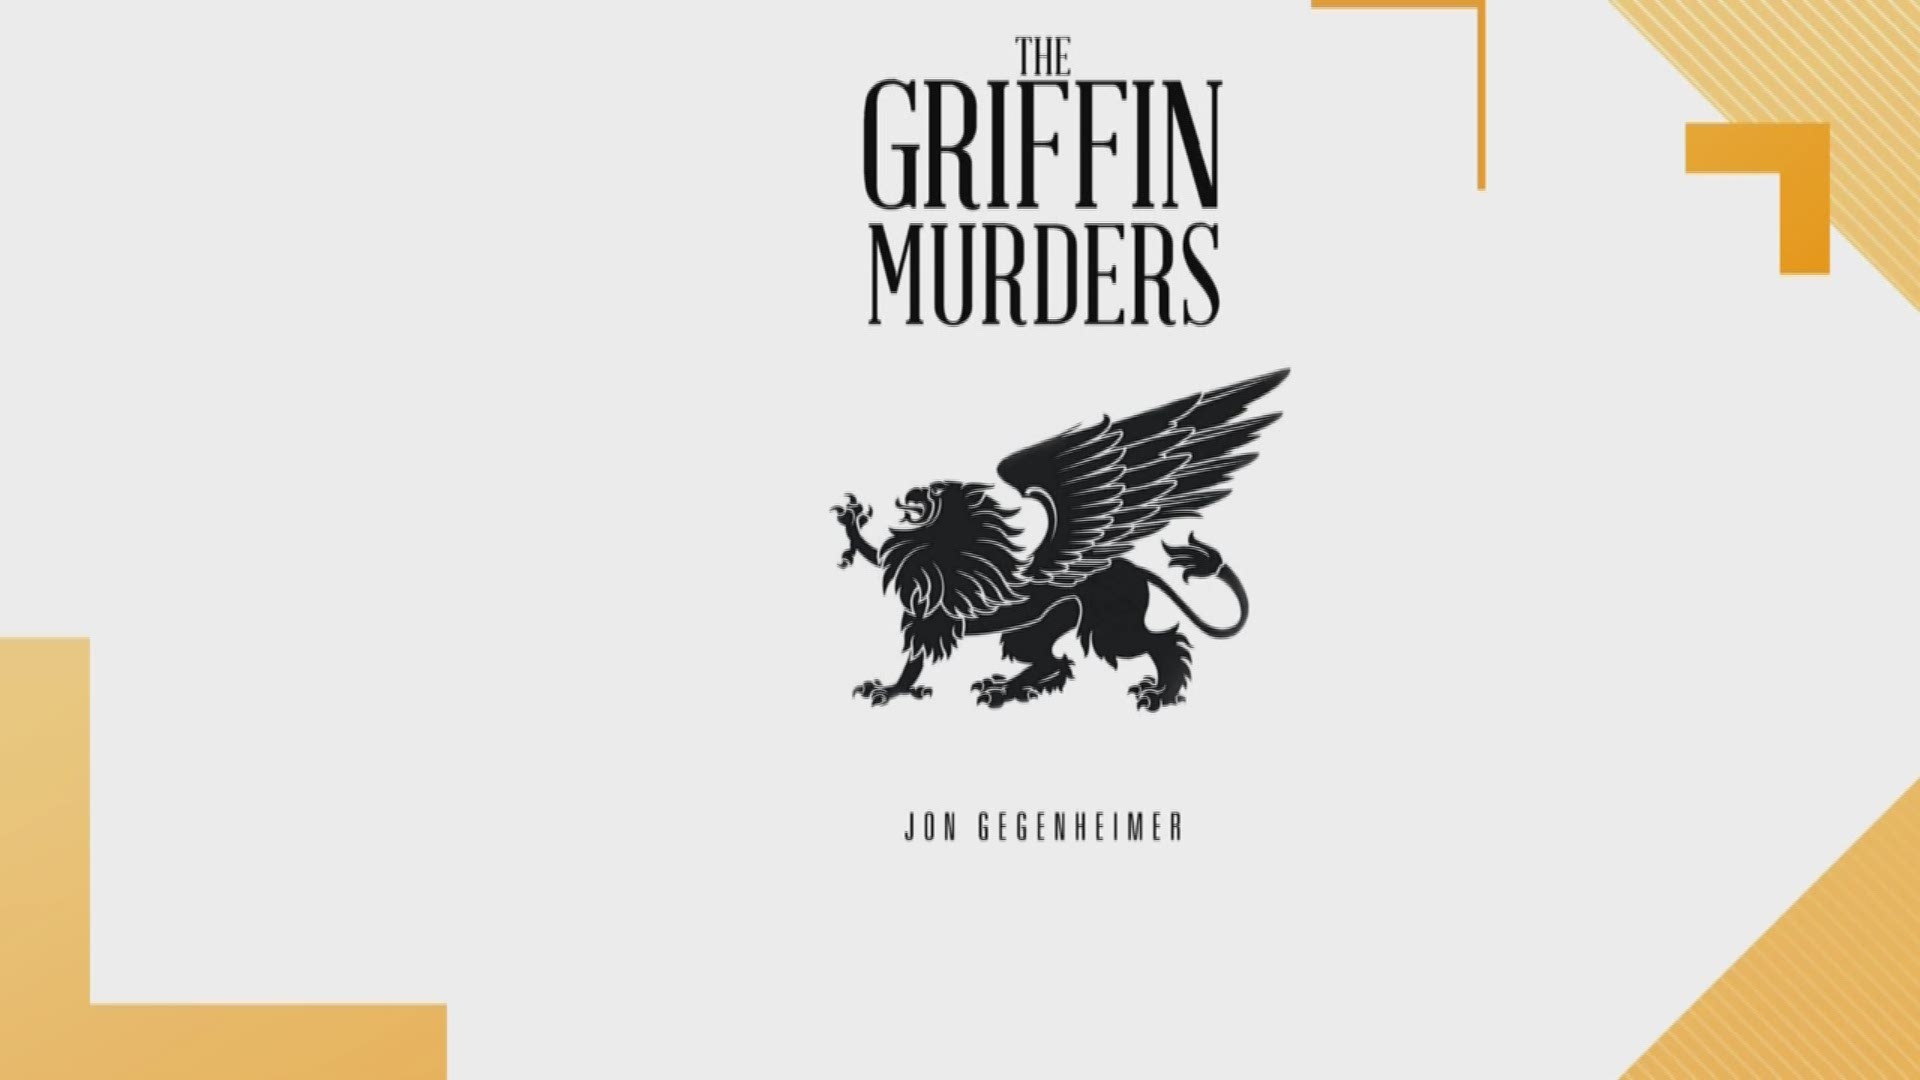 Jon Gegenheimer sits down with Eric to discuss his second novel "The Griffin Murders."